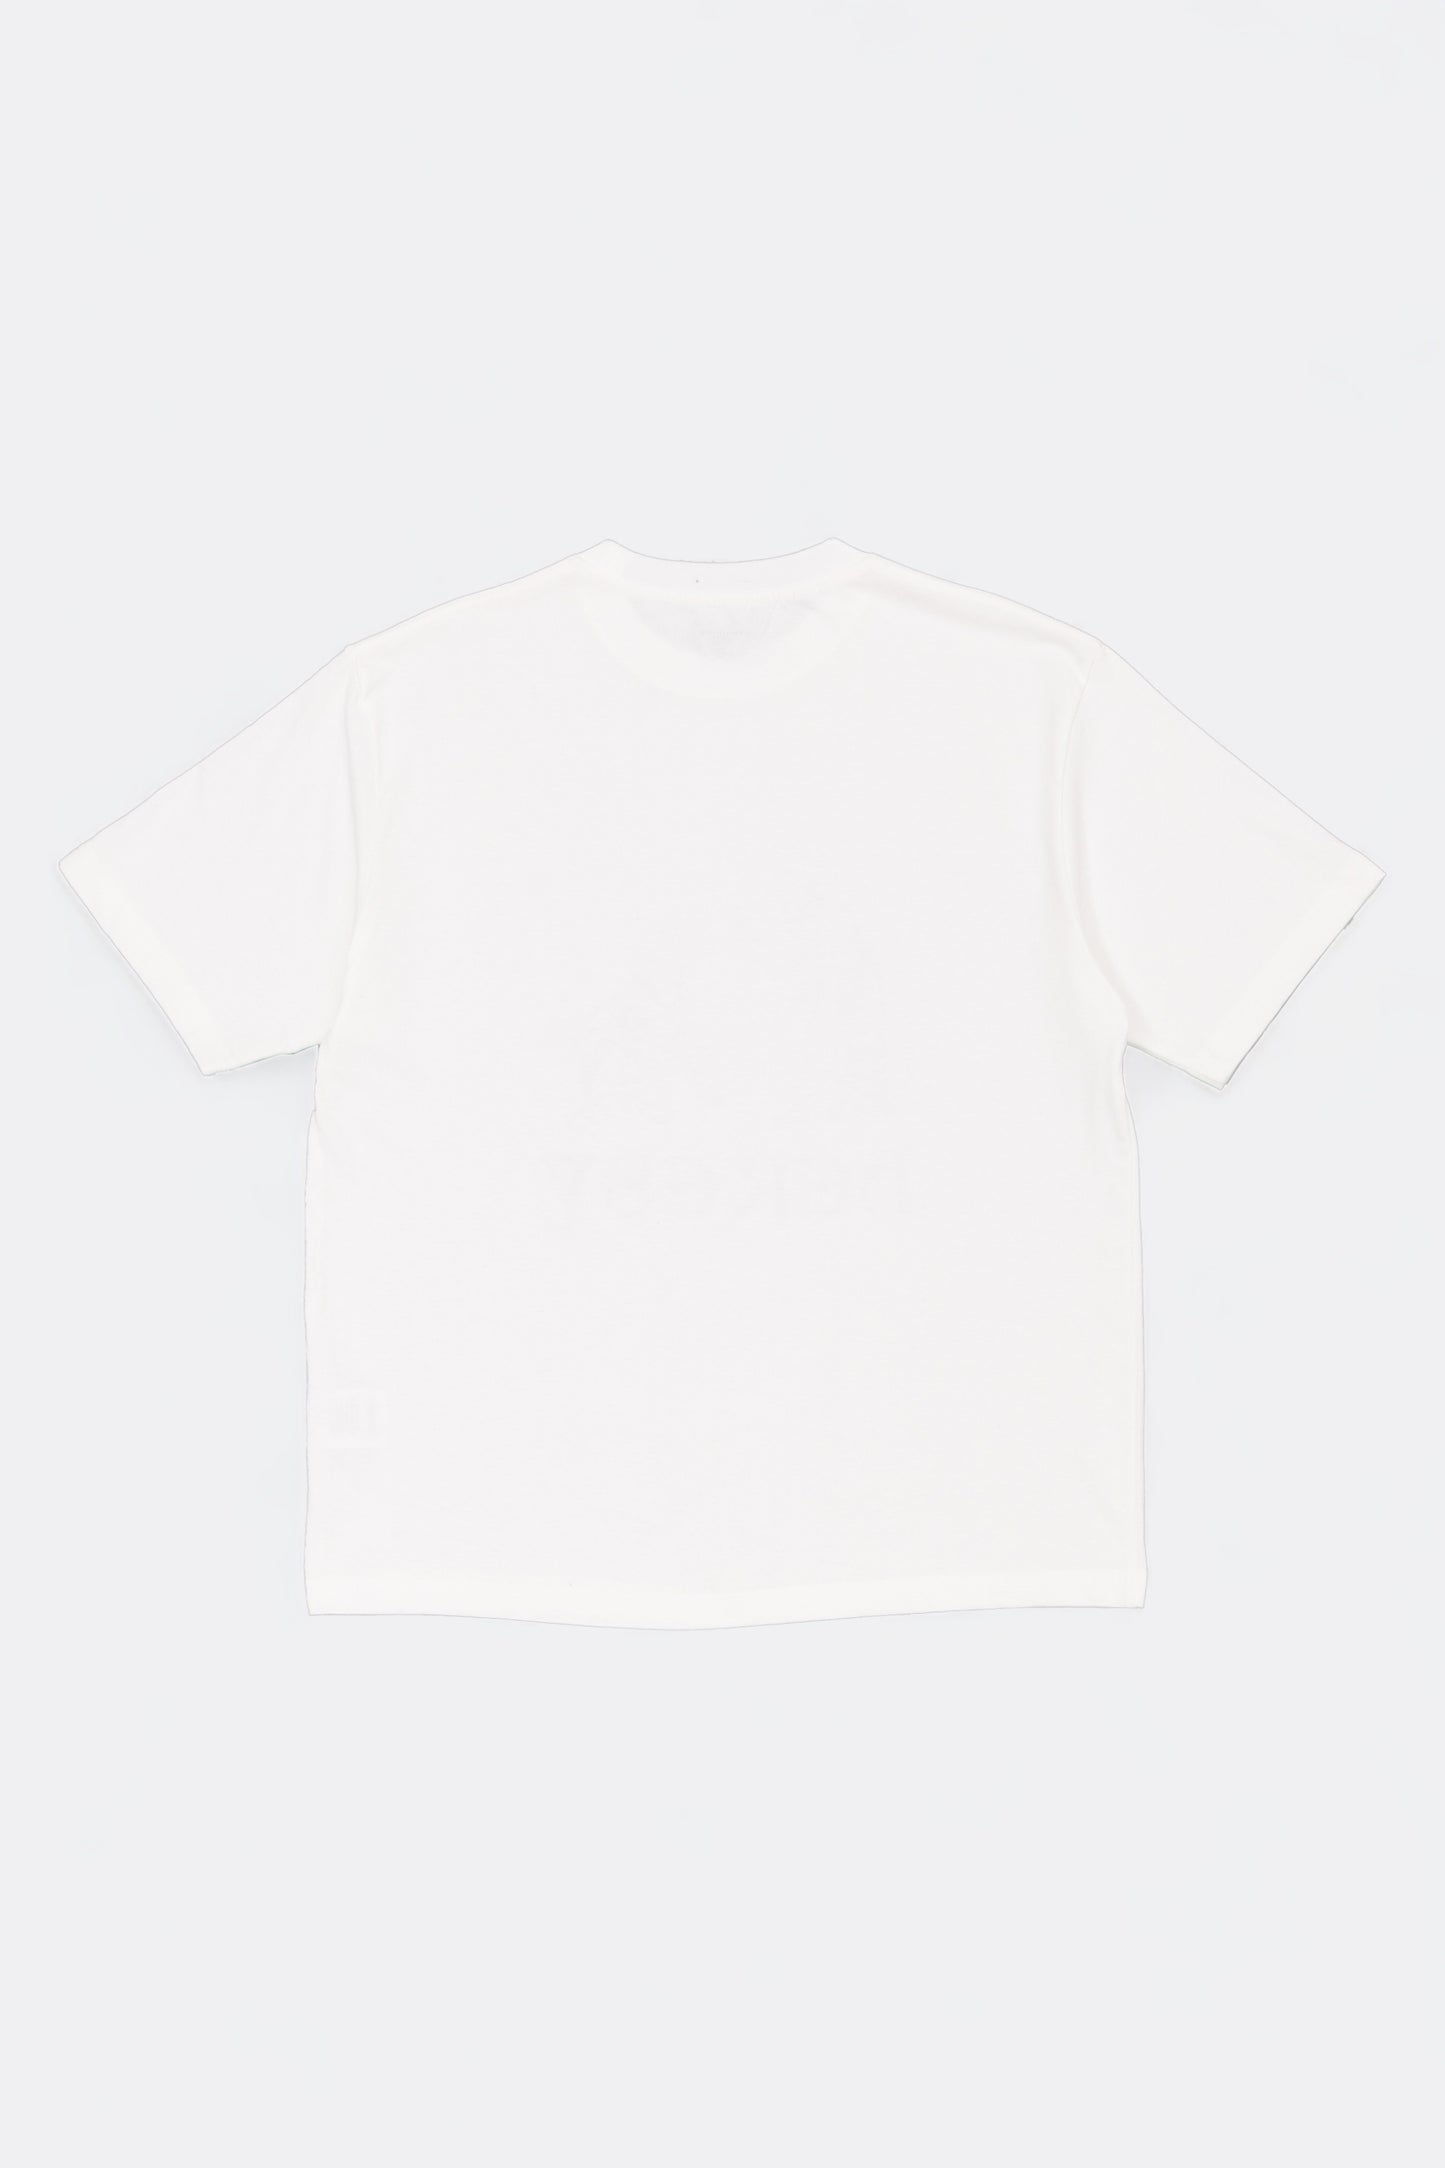 Heresy - Demons Out Tee (White)